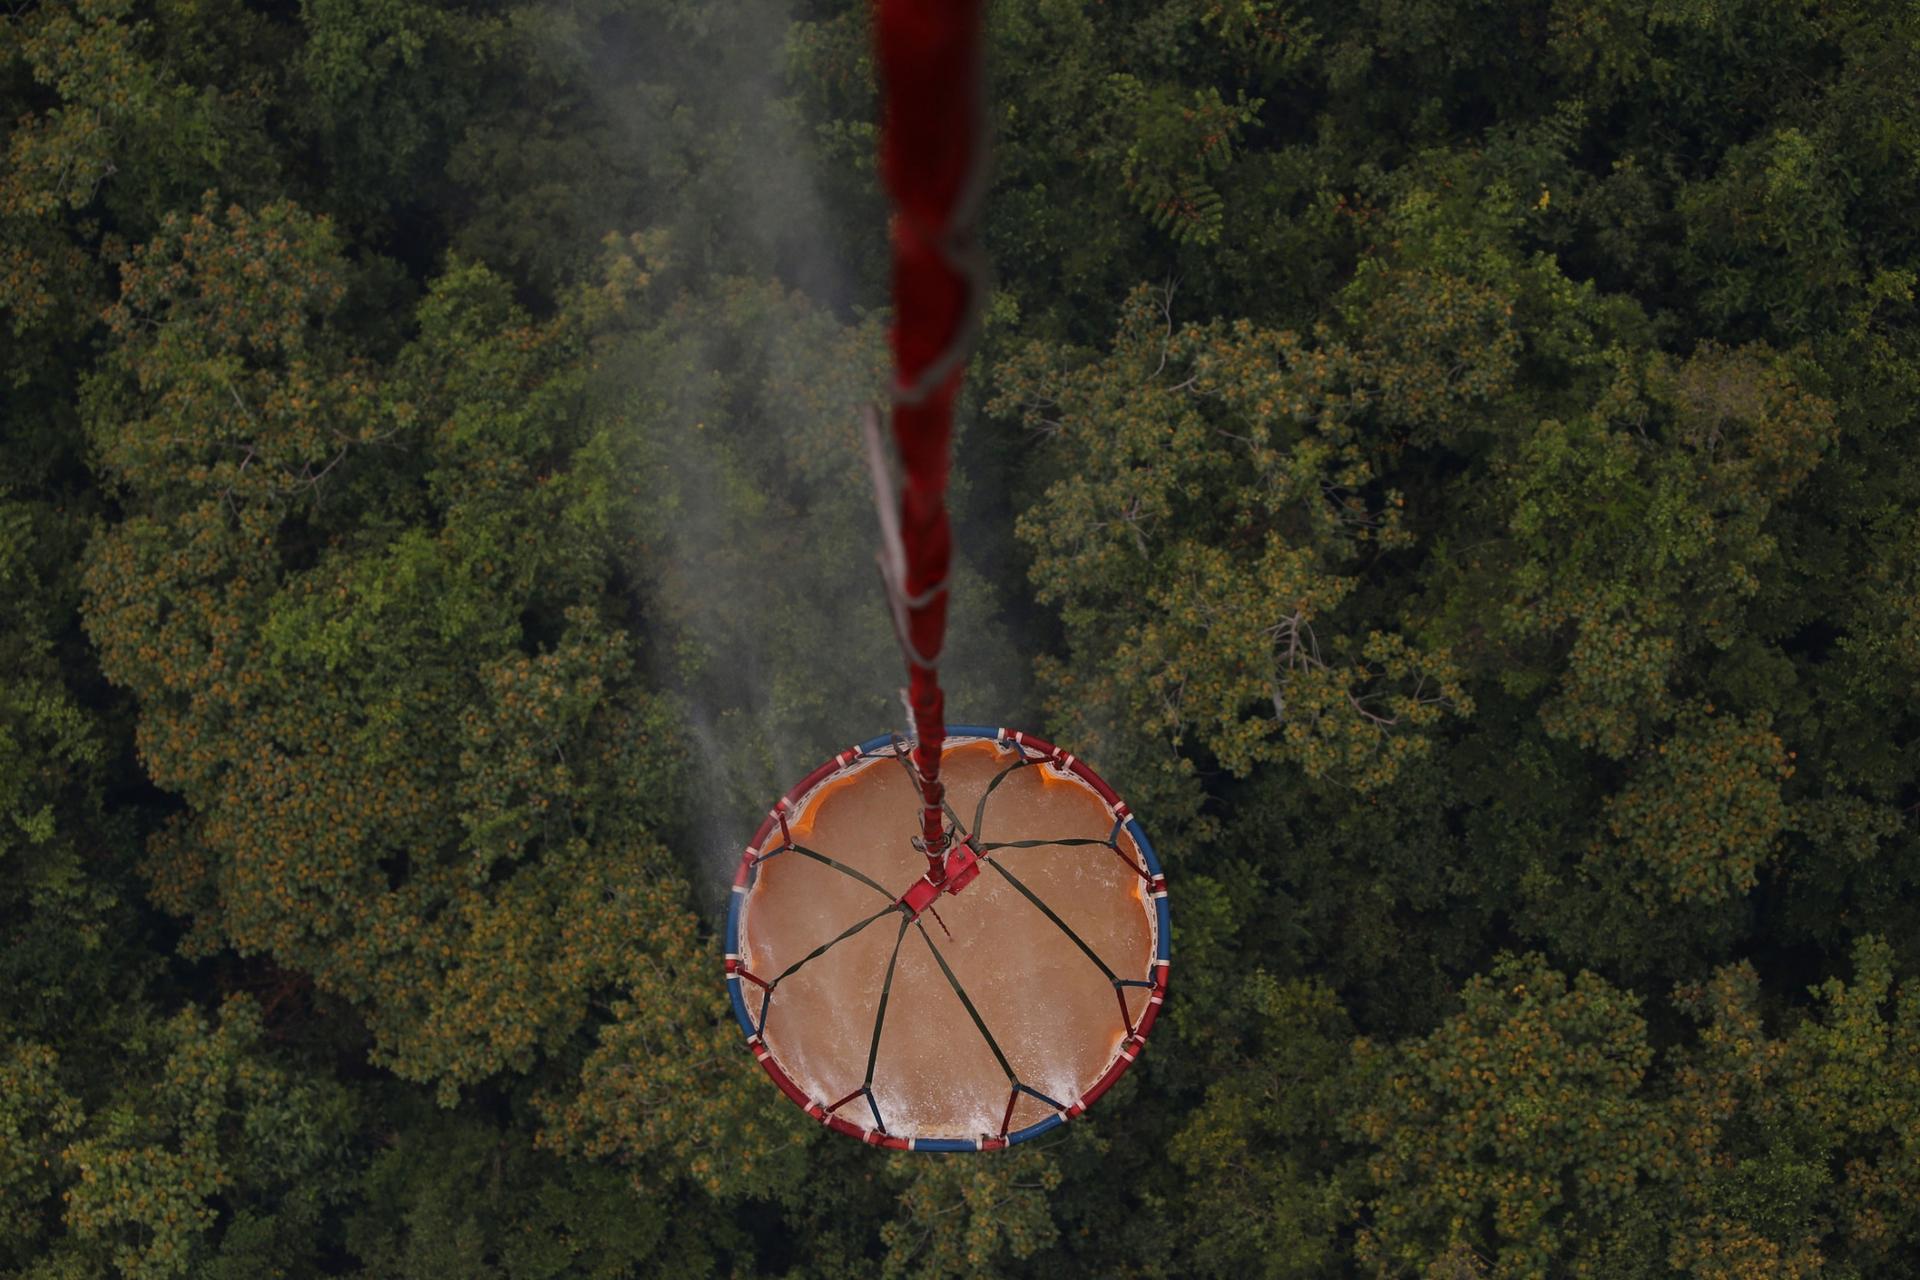 An ariel view is shown looking down at a large container of water with a forest down below.